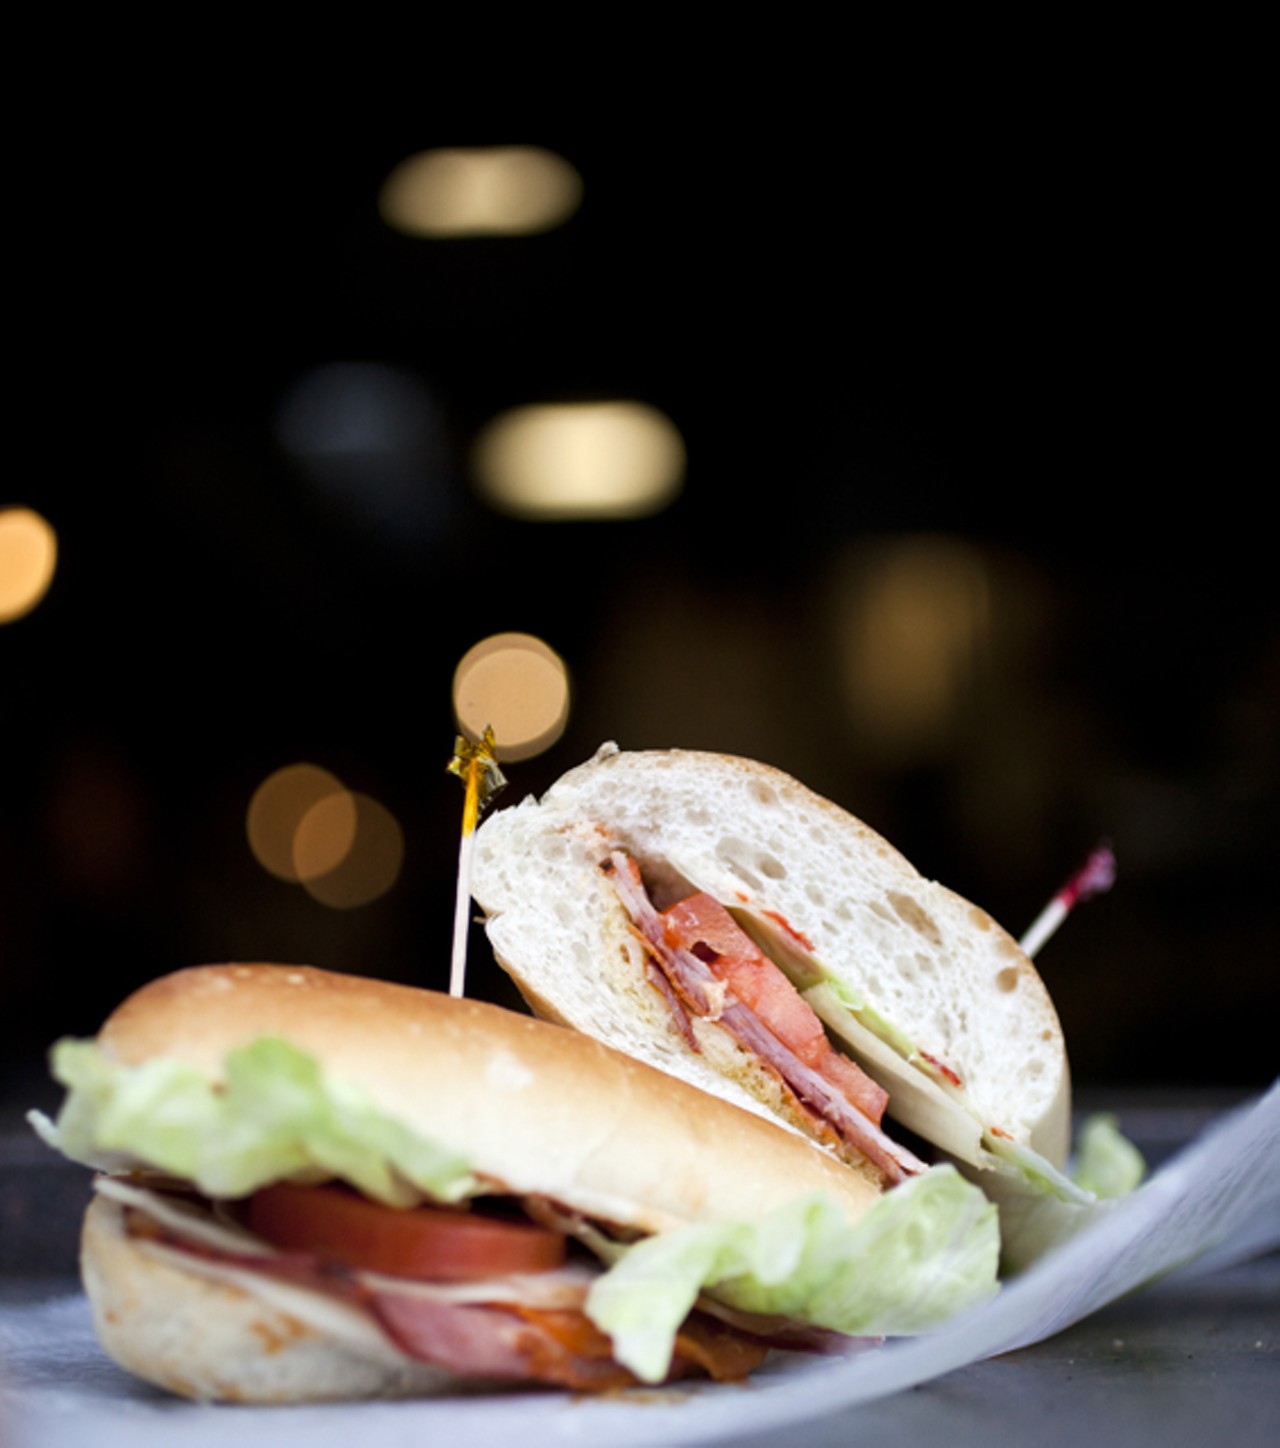 The Hill Sub is Volpi salami, capicola ham, pepperoni, prosciutto and ham, provolone, red cherry peppers, lettuce, tomatoes, and a house made vinaigrette.